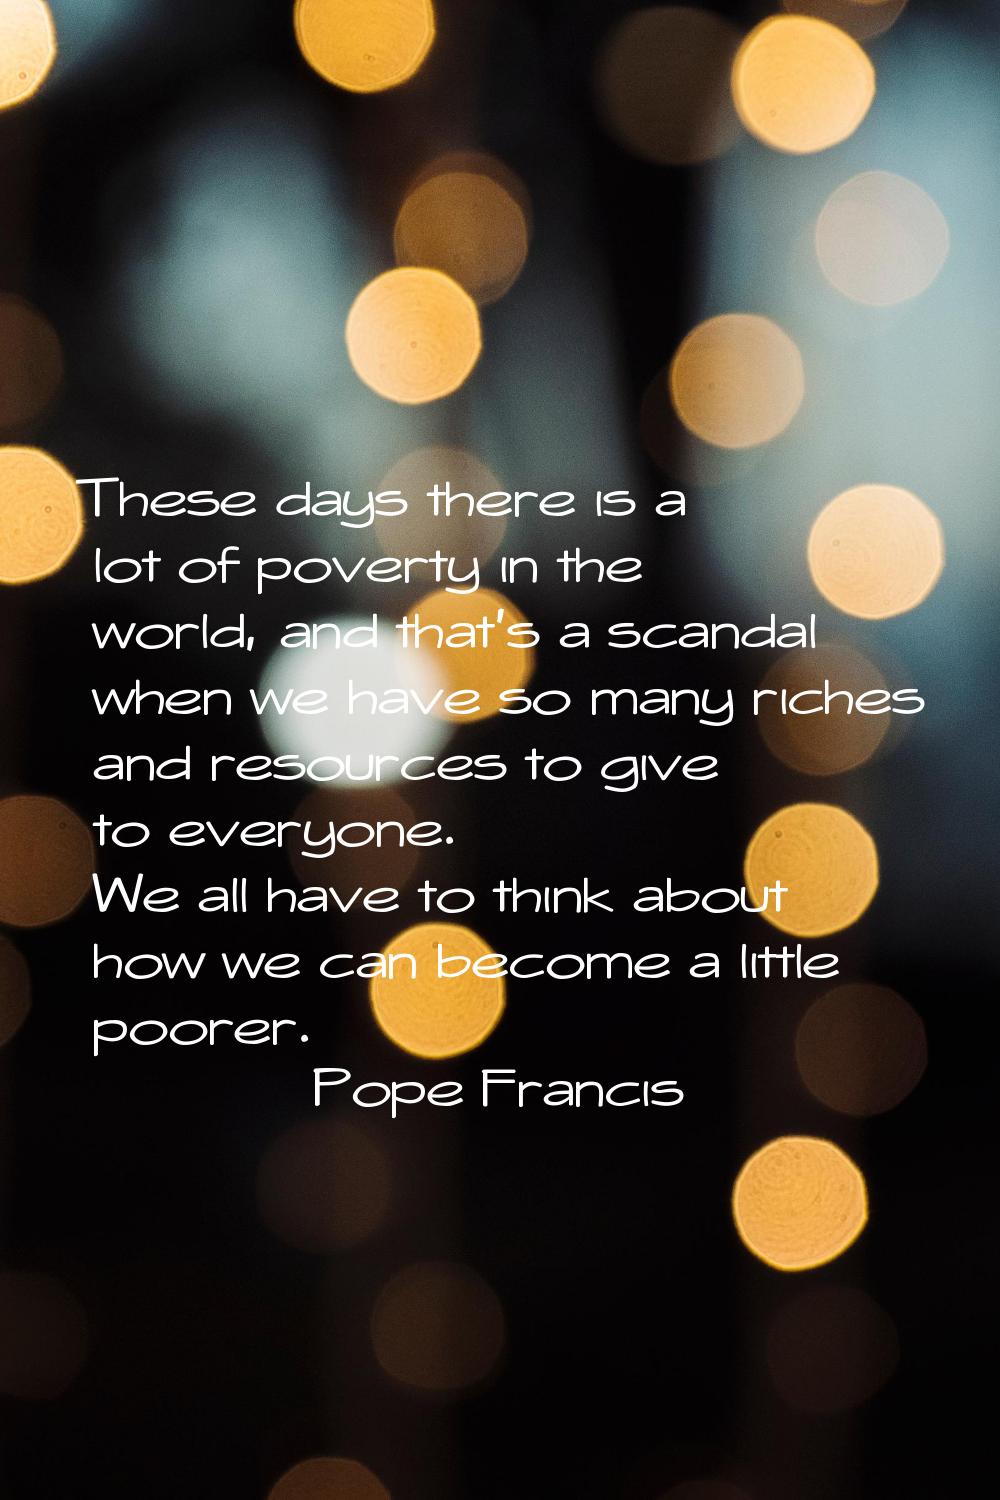 These days there is a lot of poverty in the world, and that's a scandal when we have so many riches